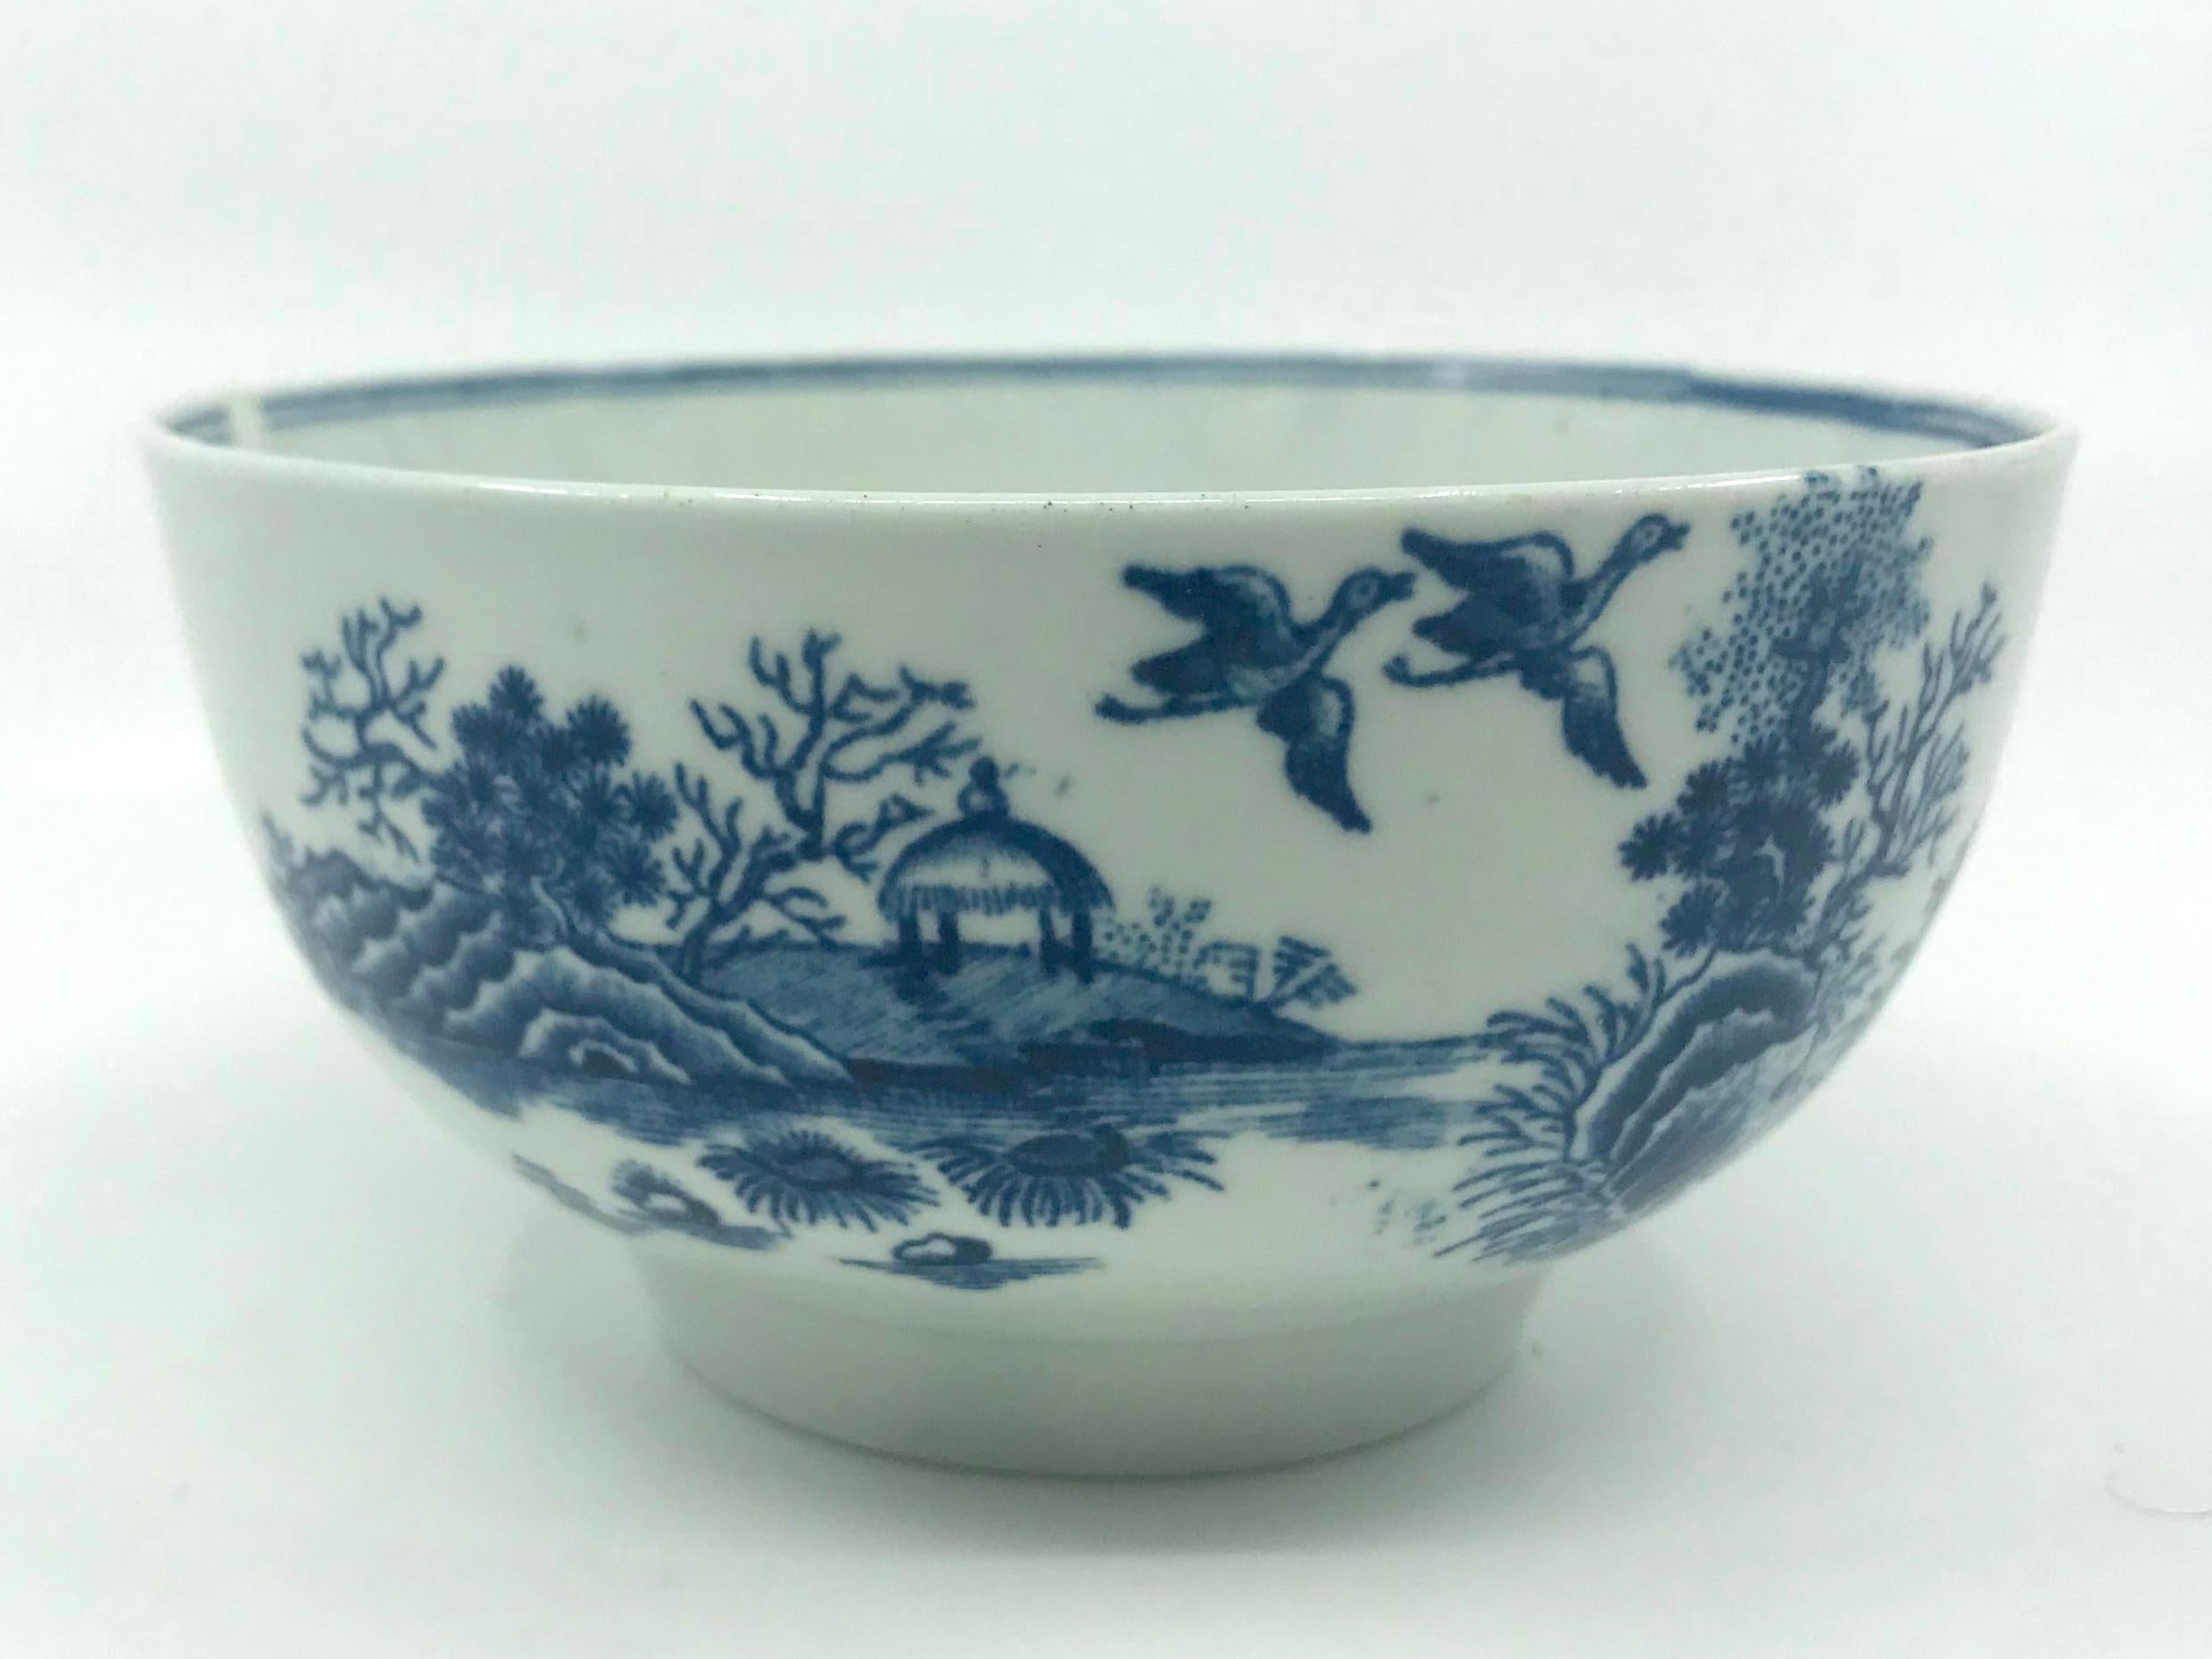 Blue and white first period Worcester chinoiserie porcelain bowl. Dr. Wall soft paste white porcelain bowl with dark blue “Fence” pattern decoration and underglaze blue crescent moon mark. In good condition with one rim chip. England, circa 1770.